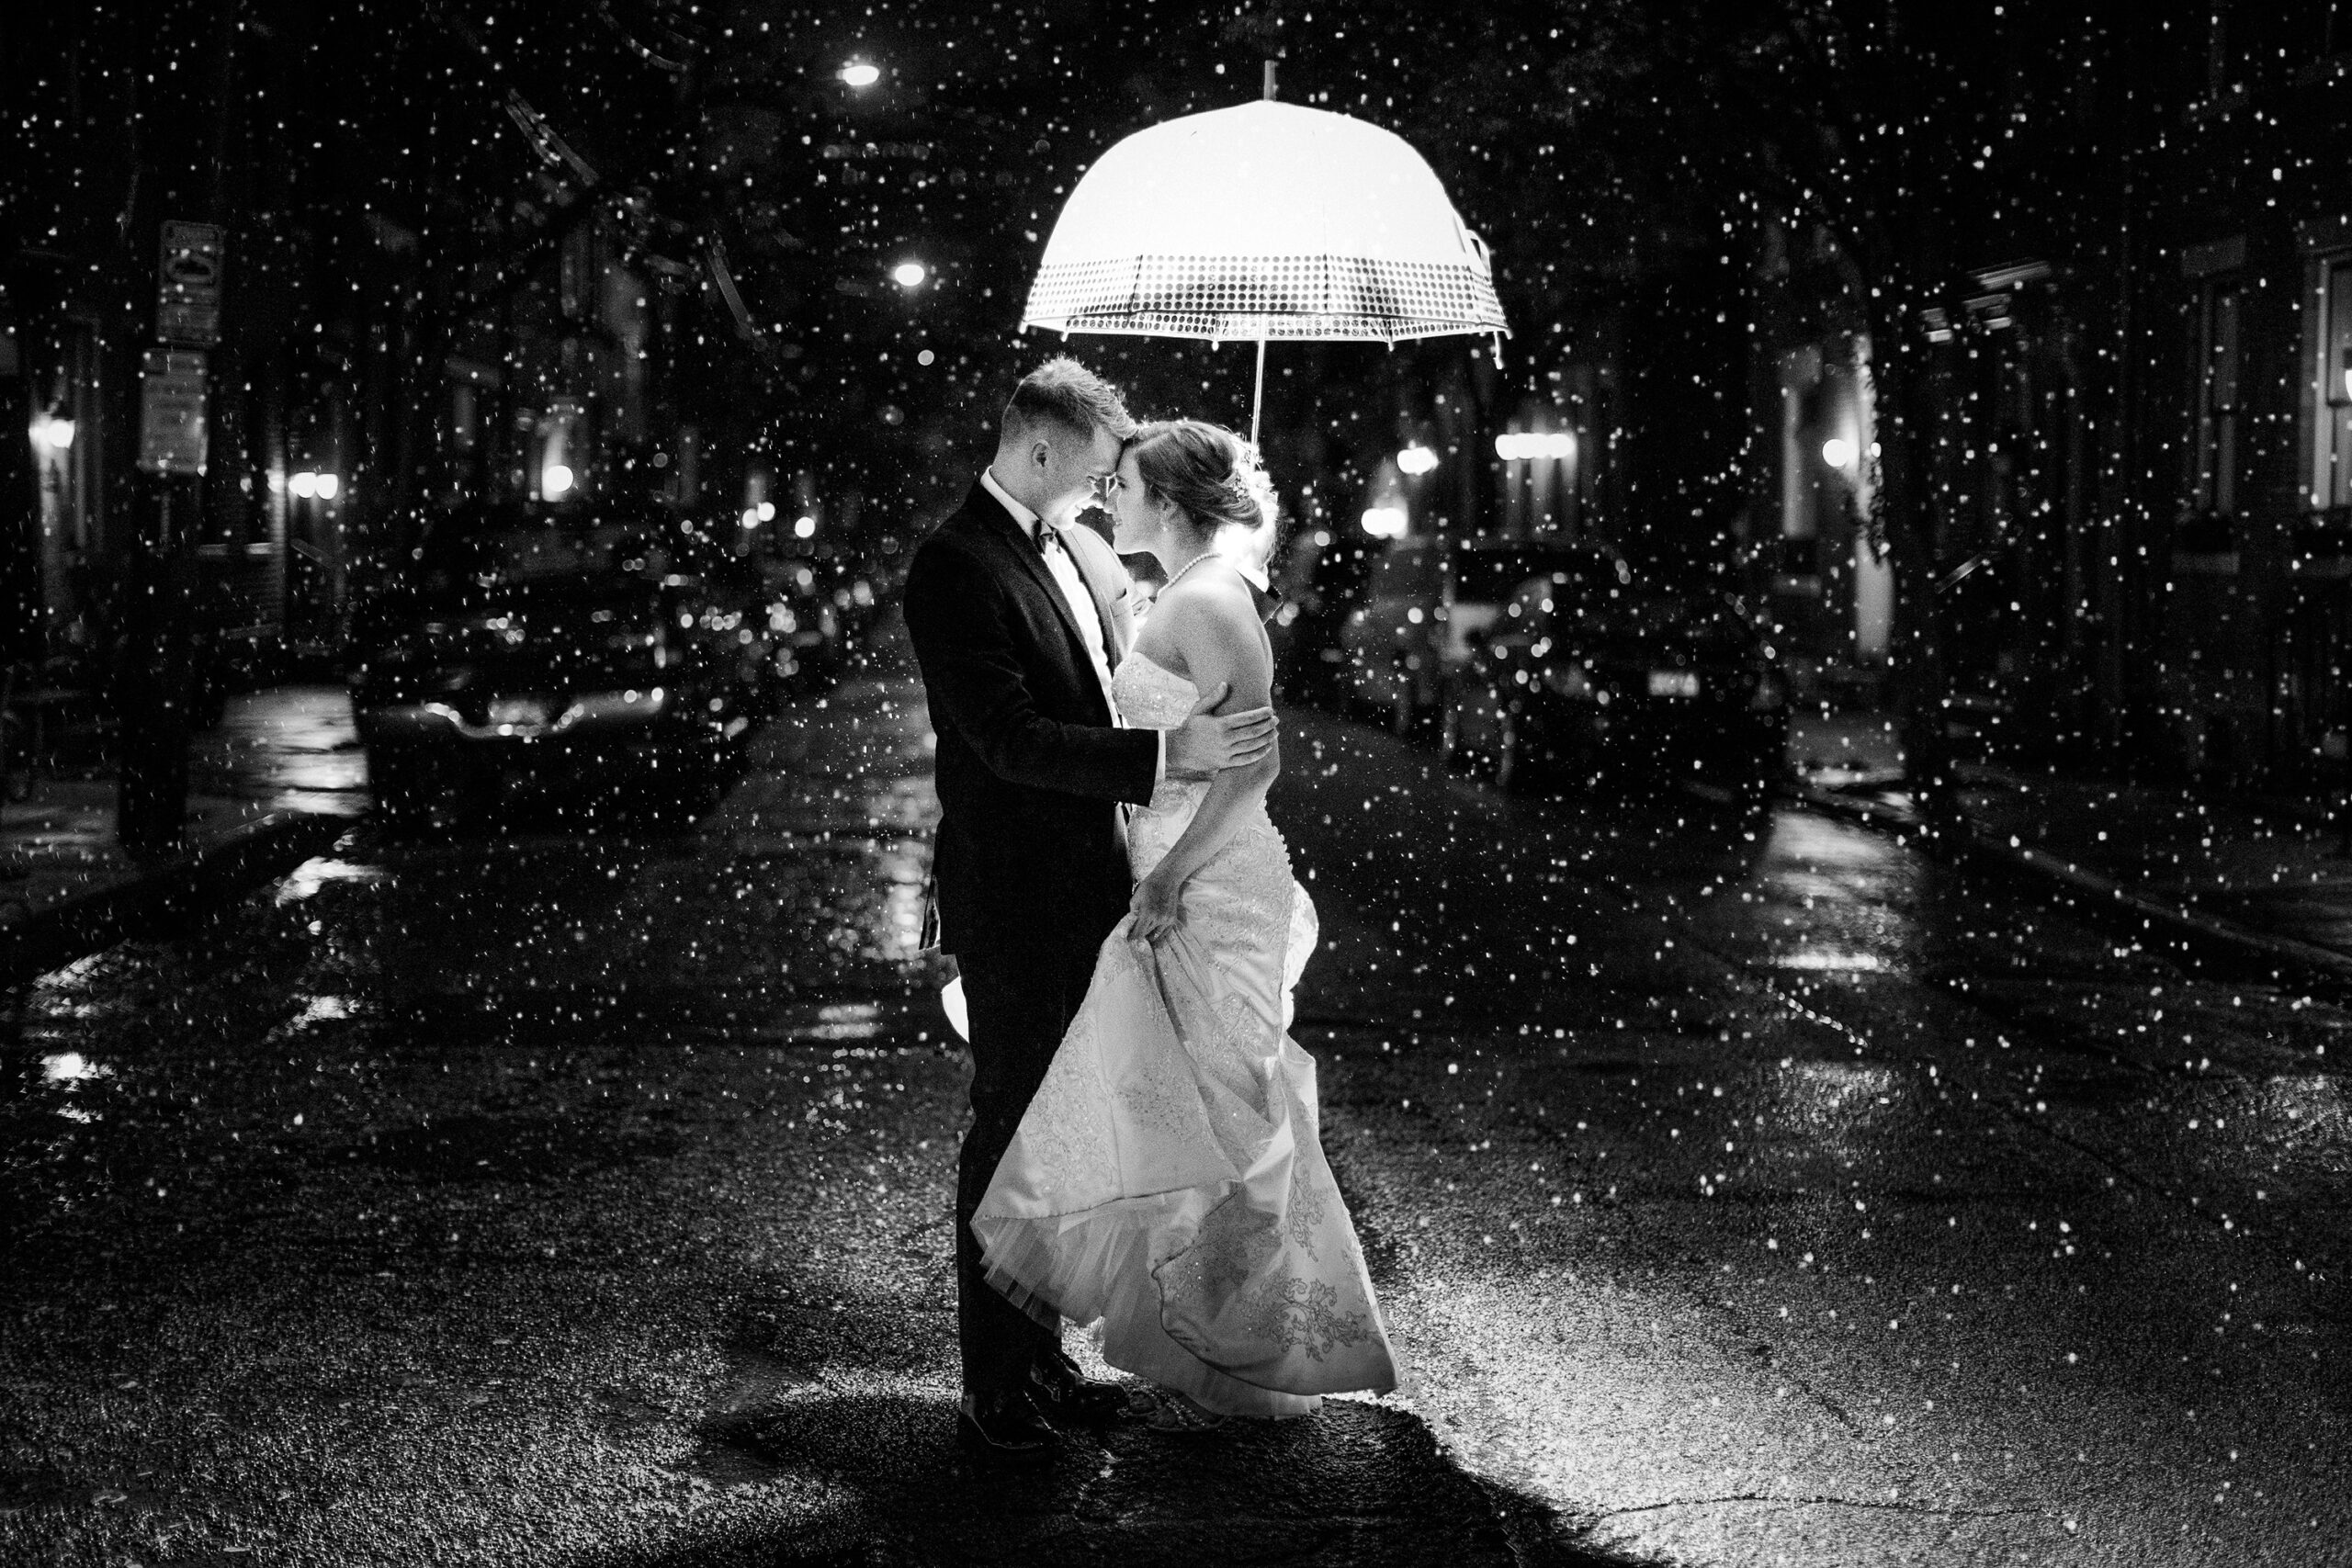 A black and white dramatic photo of a bride and groom on a street under an umbrella.